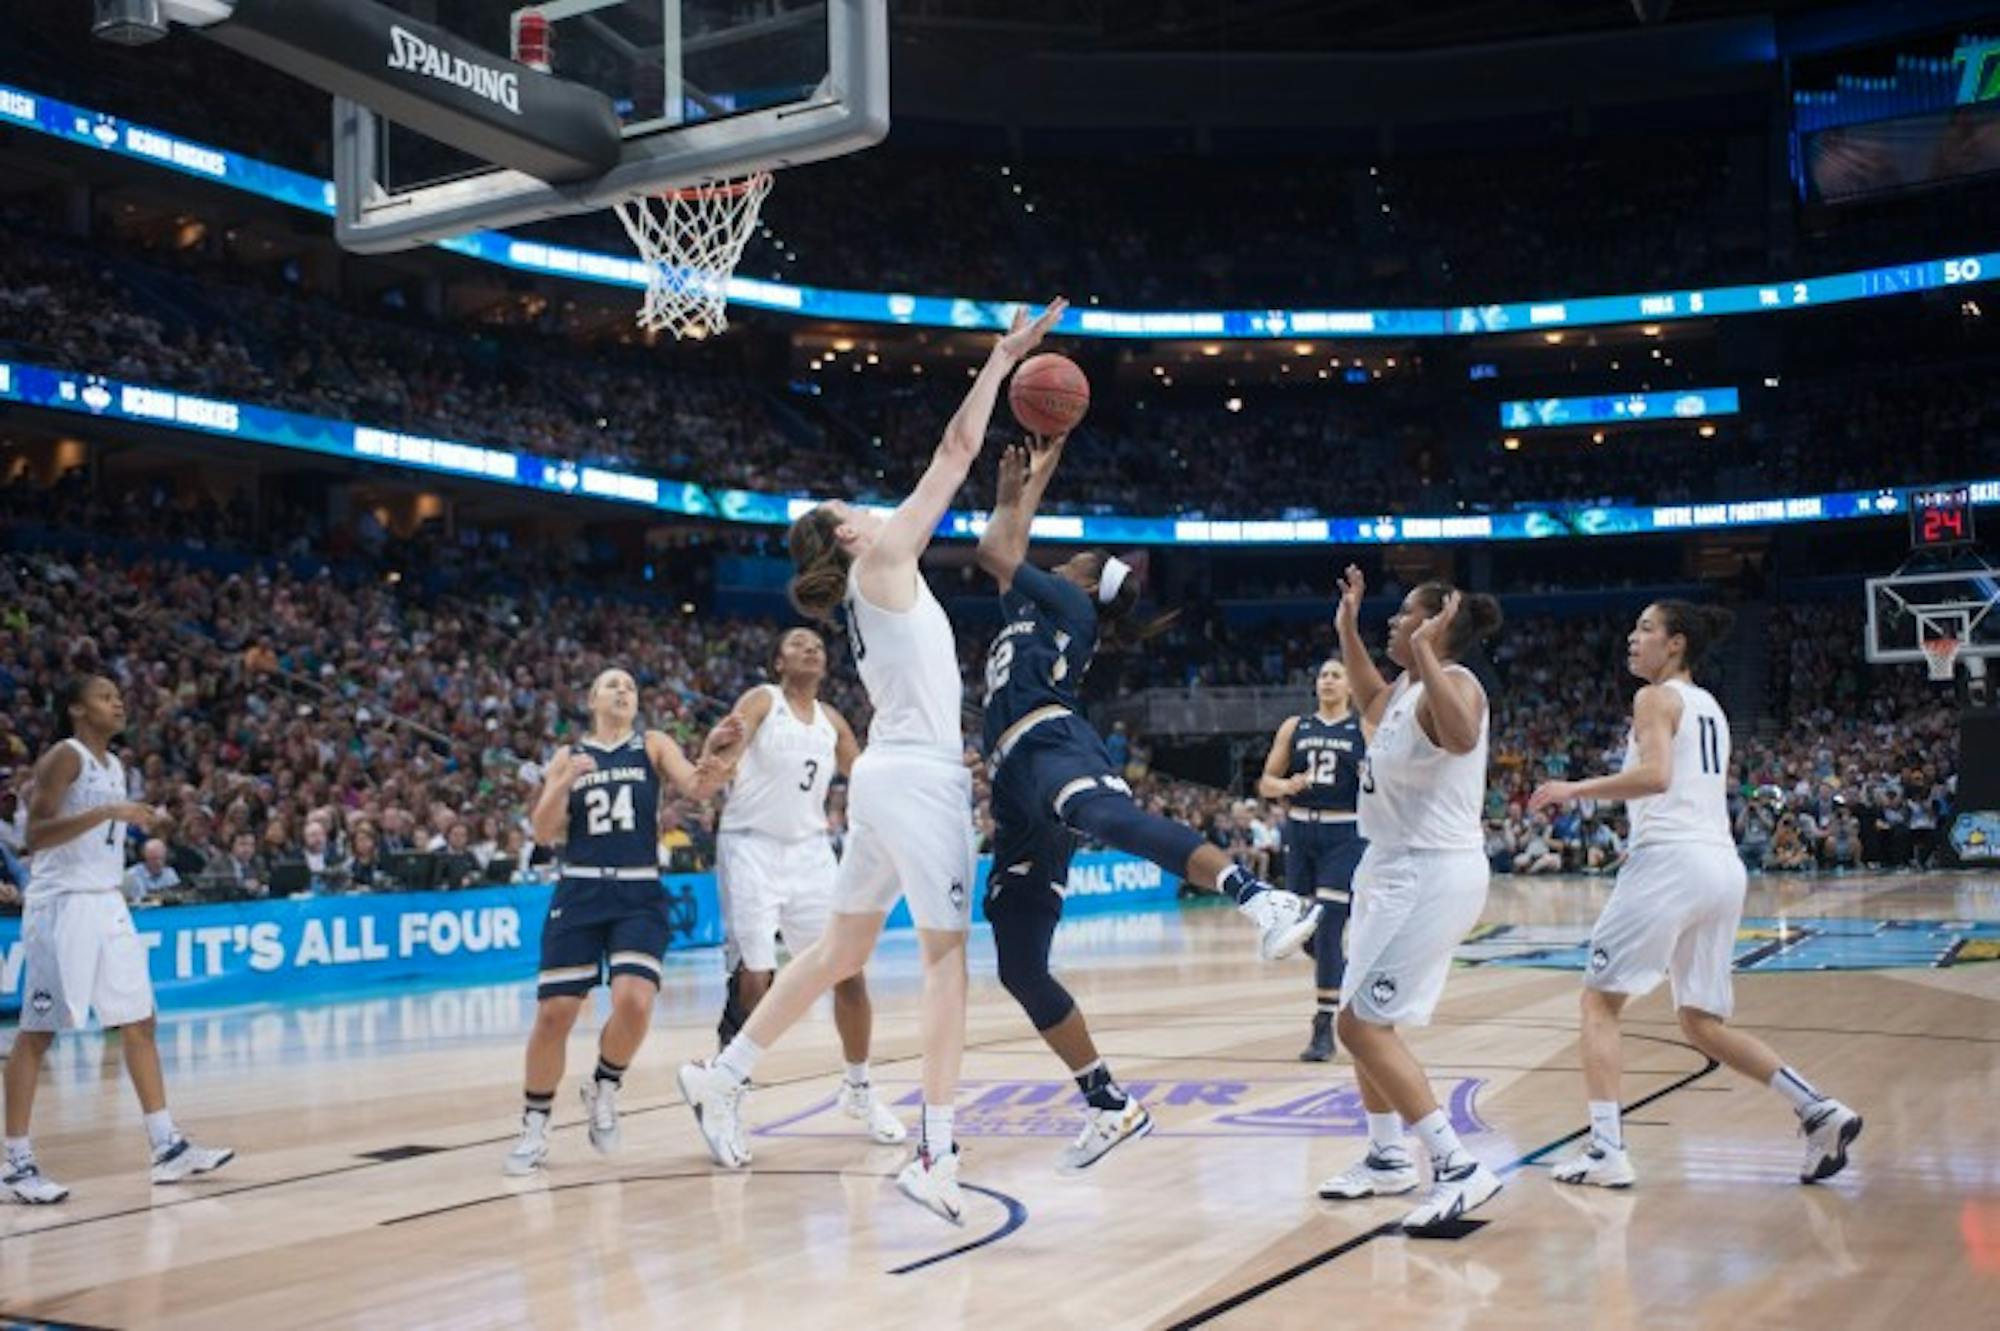 Irish junior guard Jewell Loyd elevates for a shot against Connecticut's Breanna Stewart during Tuesday's 63-53 loss.